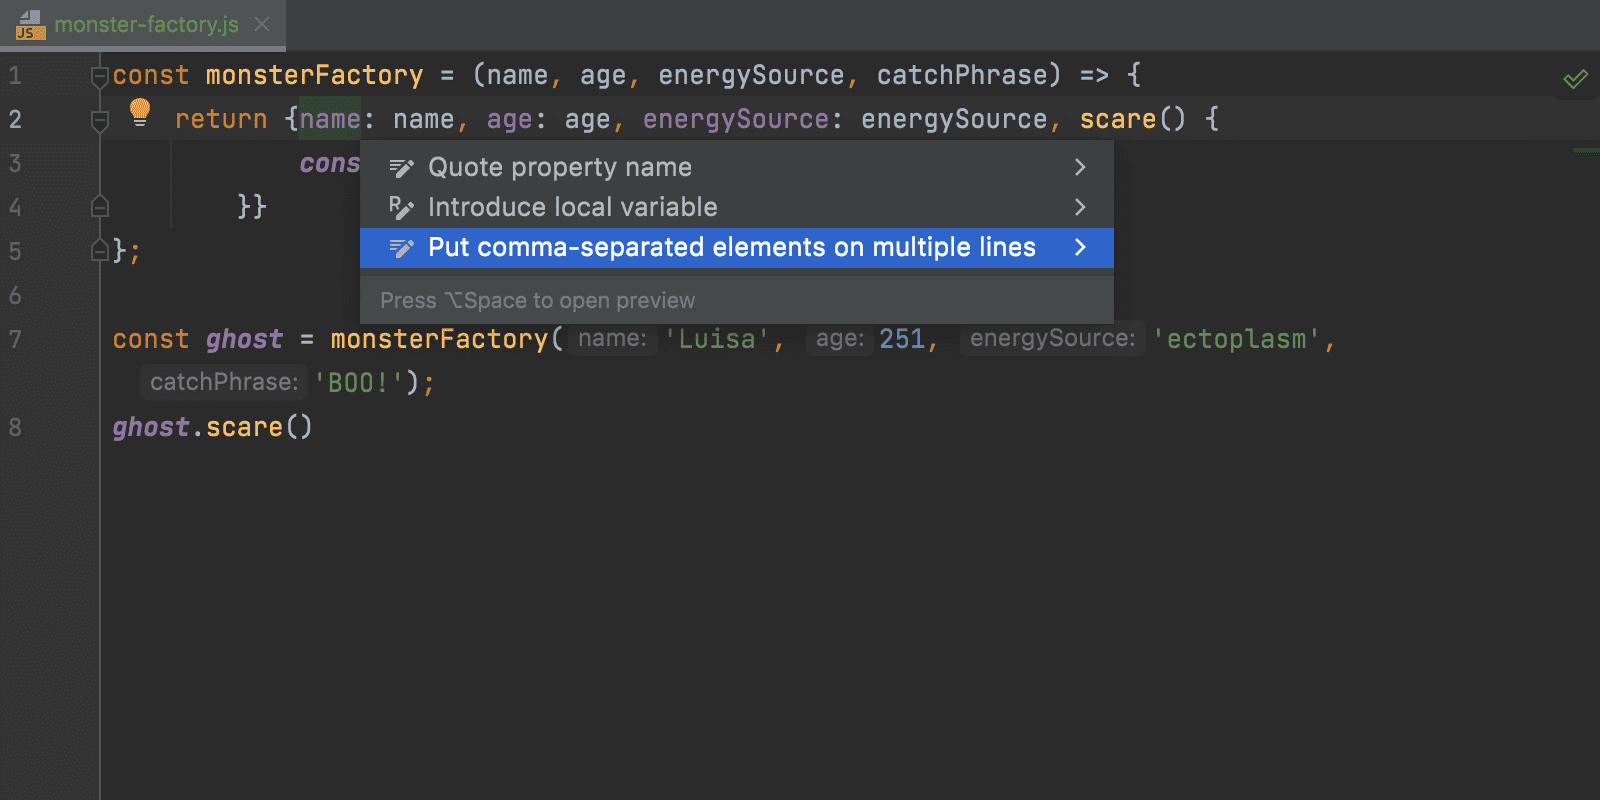 intention-for-putting-elements-on-separate-lines-and-back-webstorm